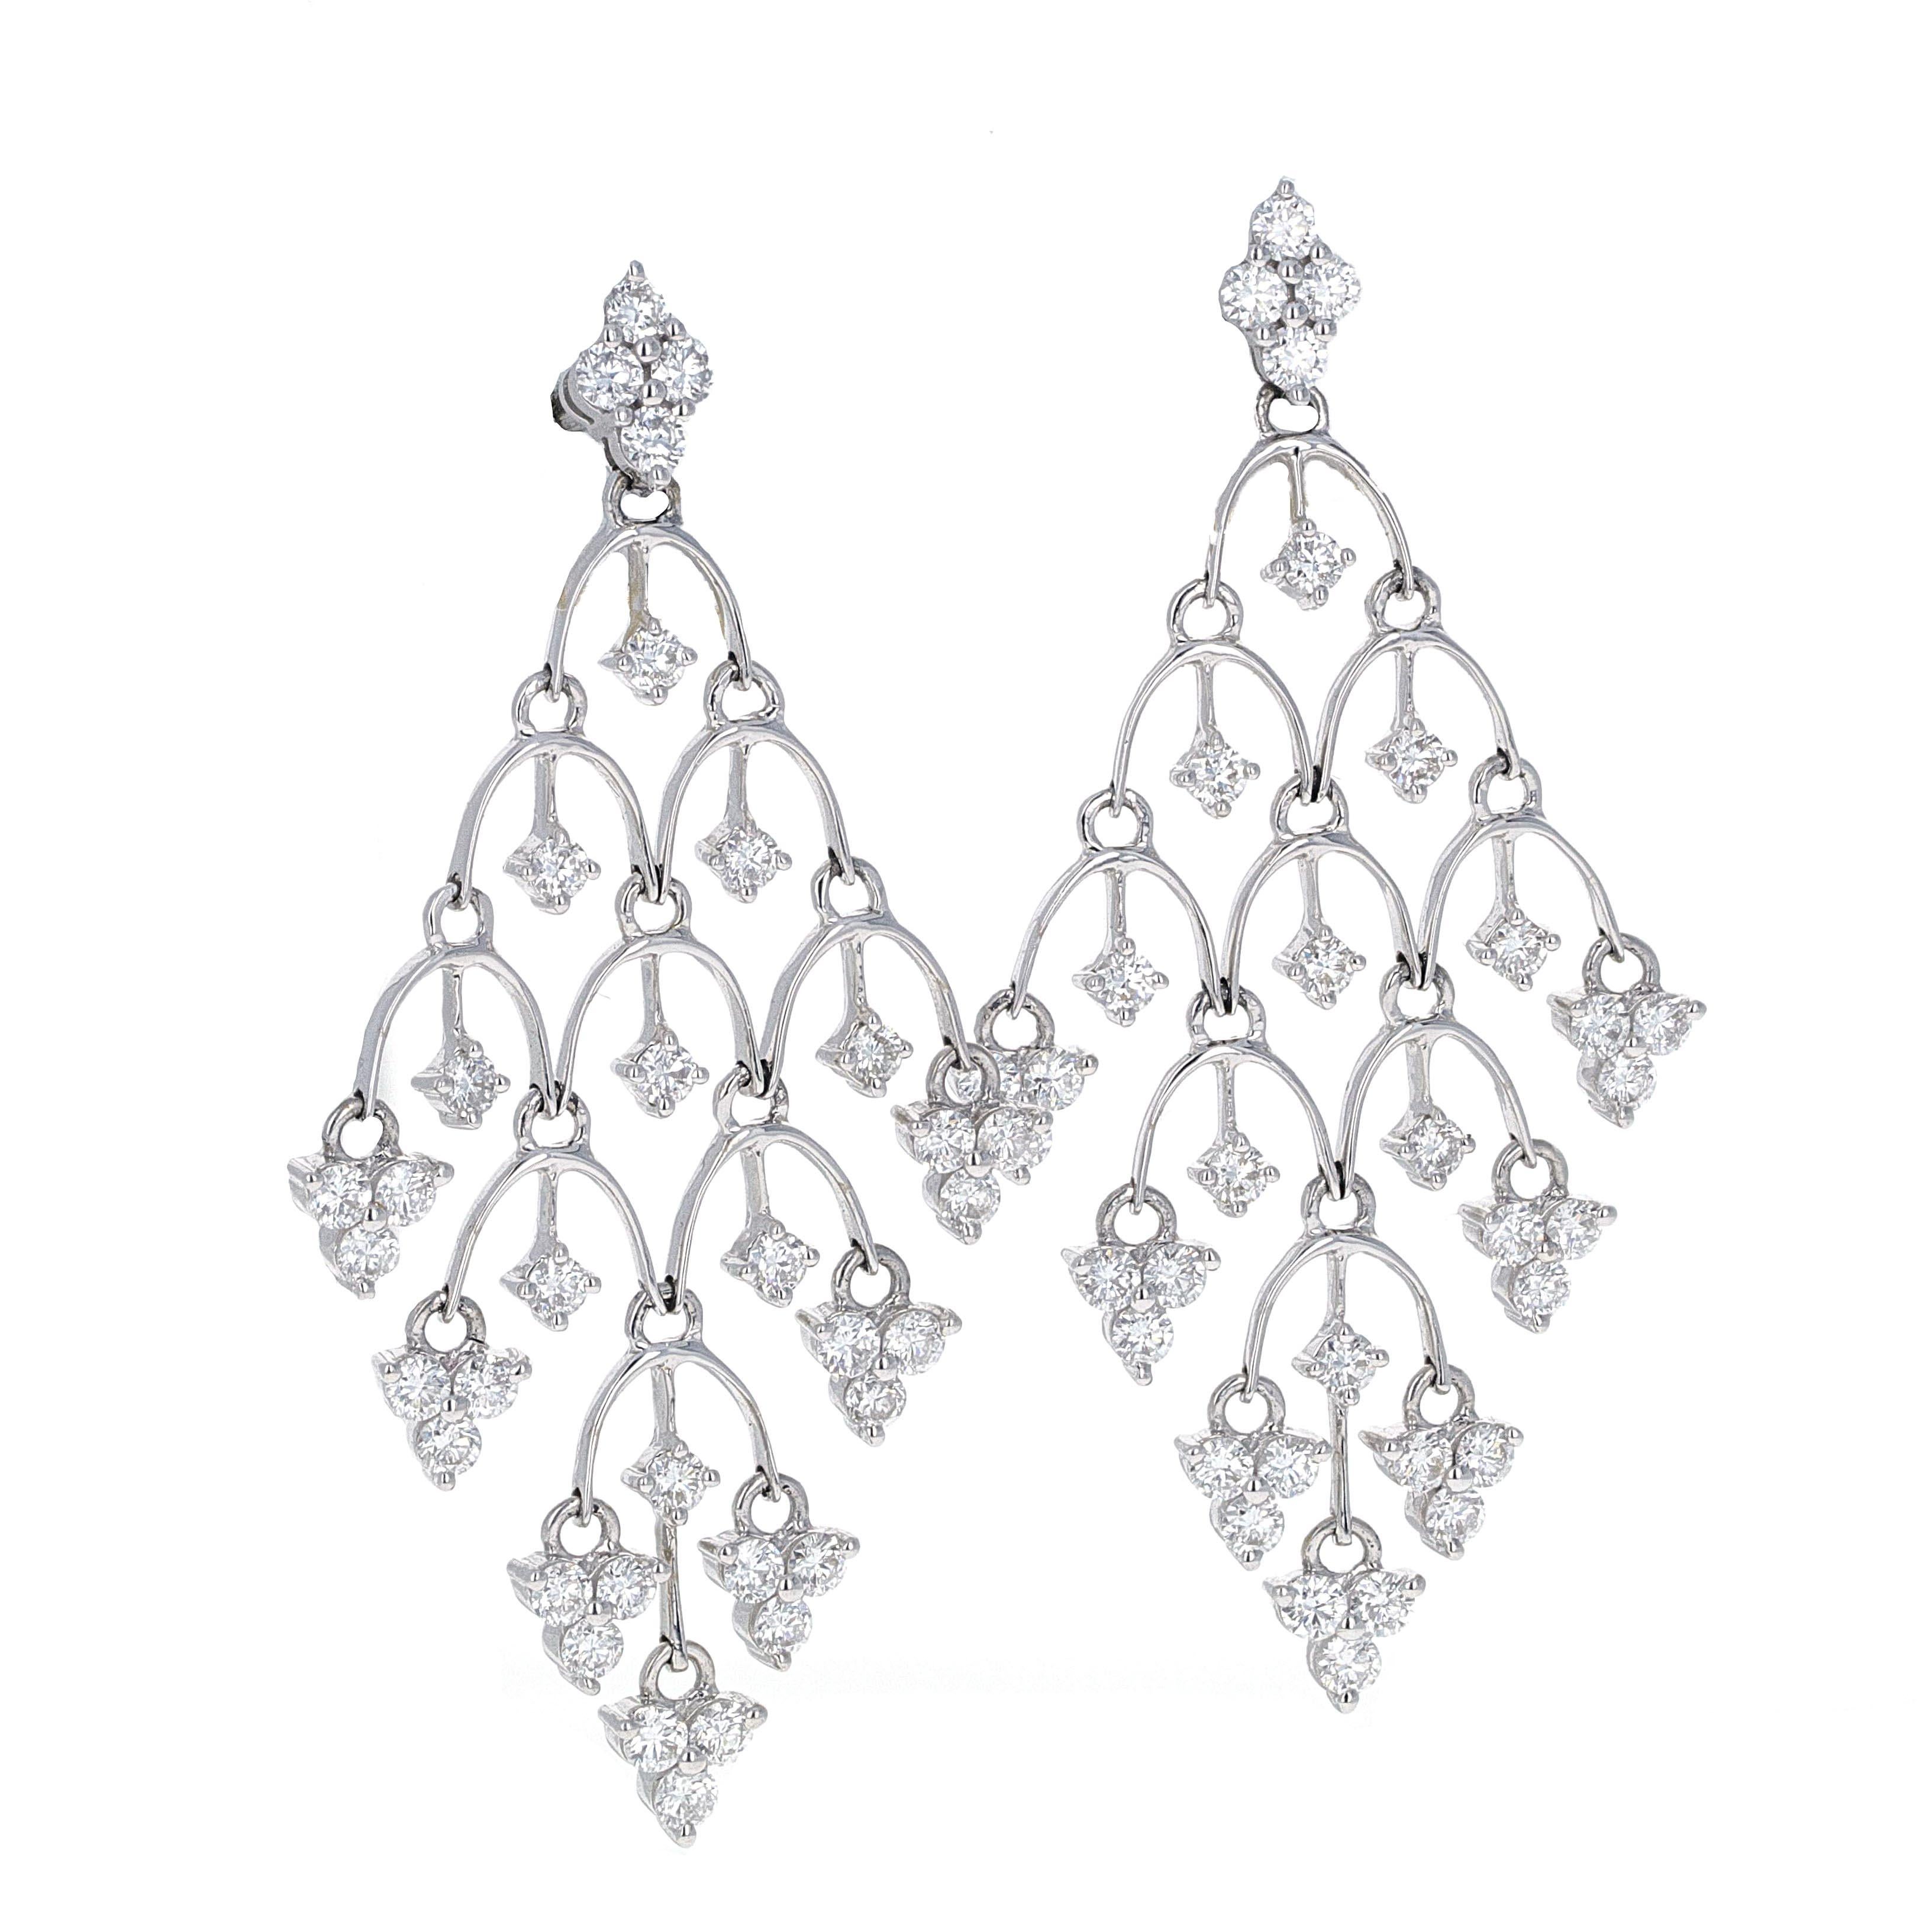 Diamond chandelier mesh drop earrings featuring 68 round brilliant cut diamonds weighing 2.17 carats. The diamonds are G-H color, VS-SI clarity. The earrings have beautiful movement, are made in 18 karat white gold and measure 1 inch wide and 1 7/8